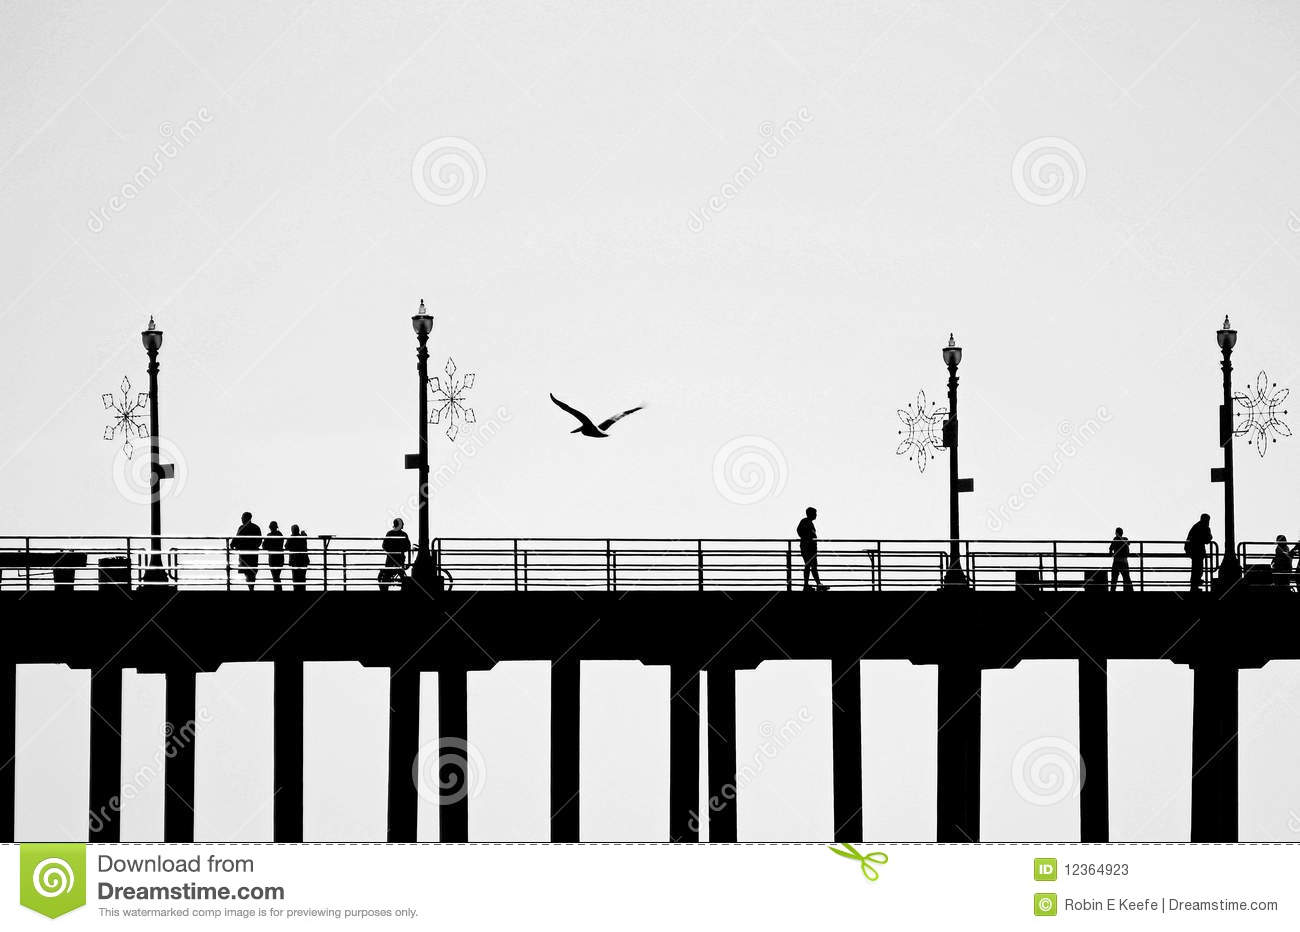 Pier With Four Lampposts Is Seen In Silhouette As People Walk On It